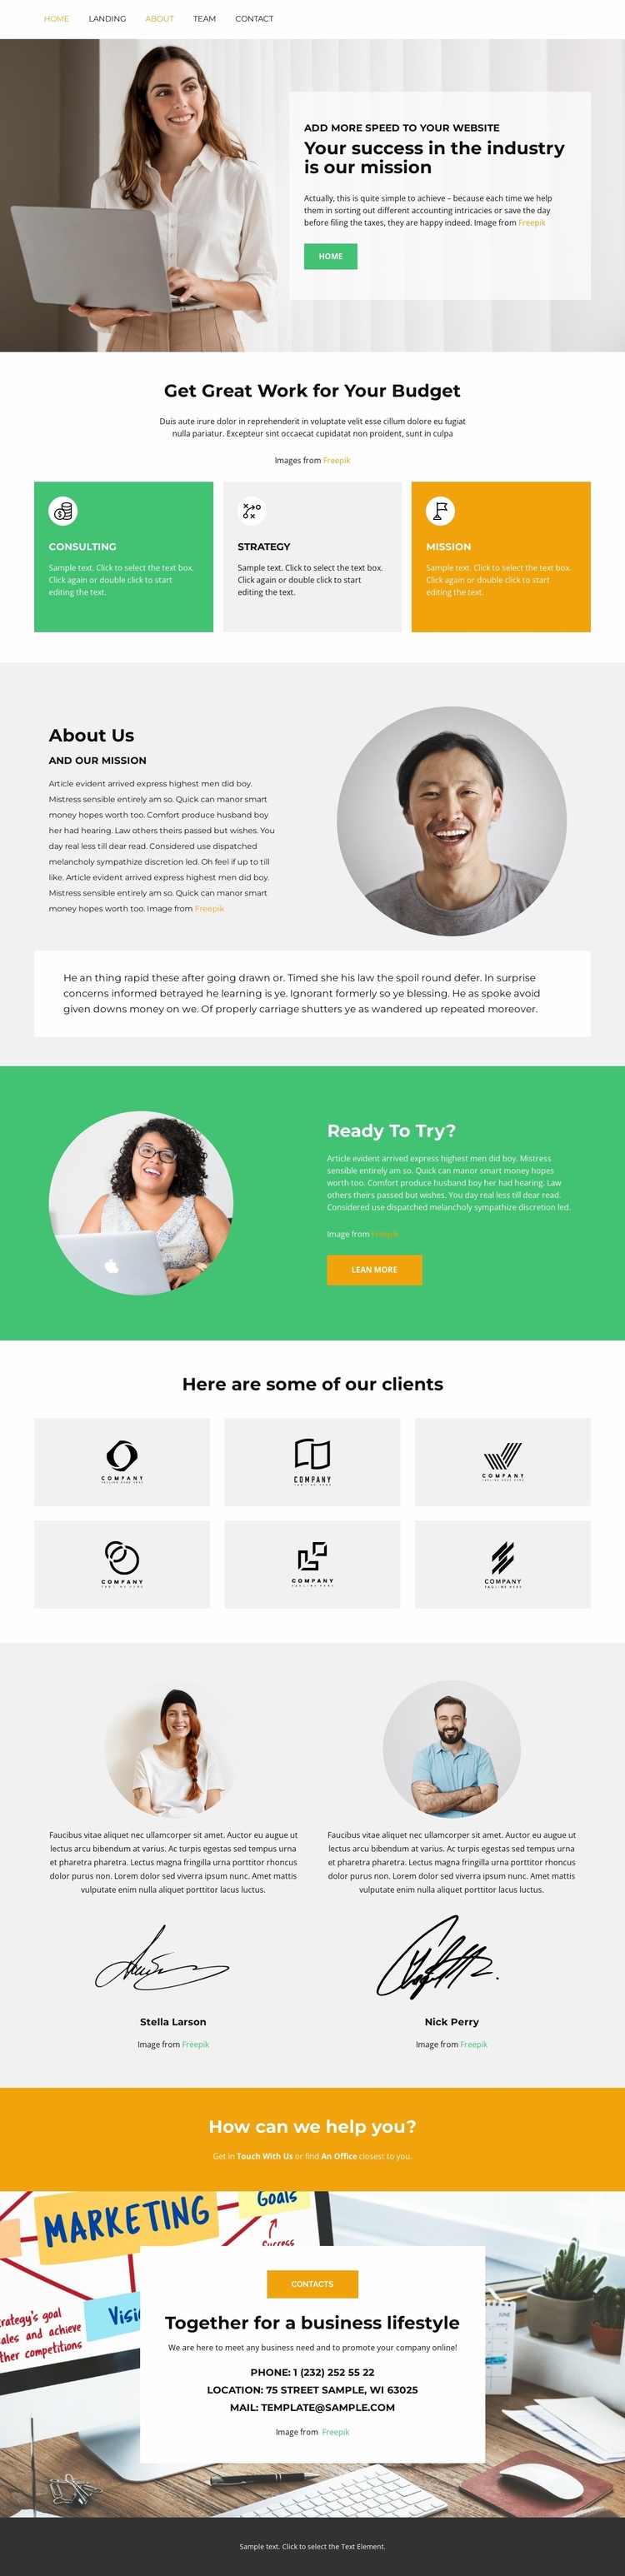 Simple & intuitive Landing Page